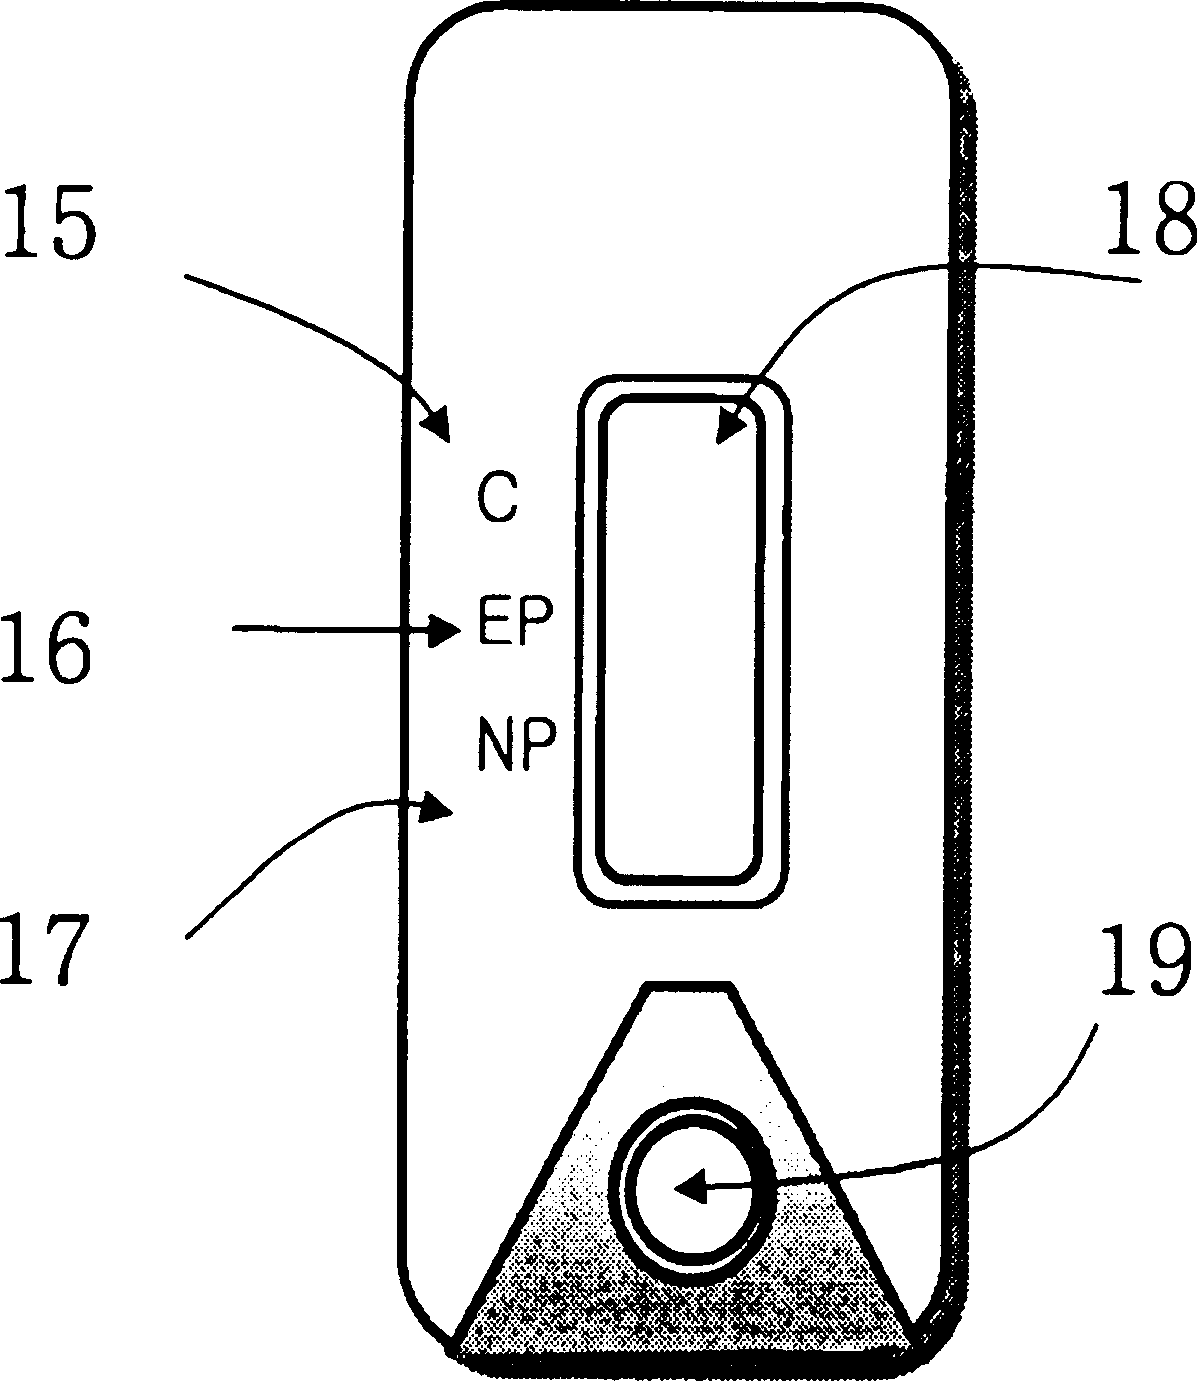 Diagnostic device for distingushing between normal and ectopic pregnancy and method for preparing the same